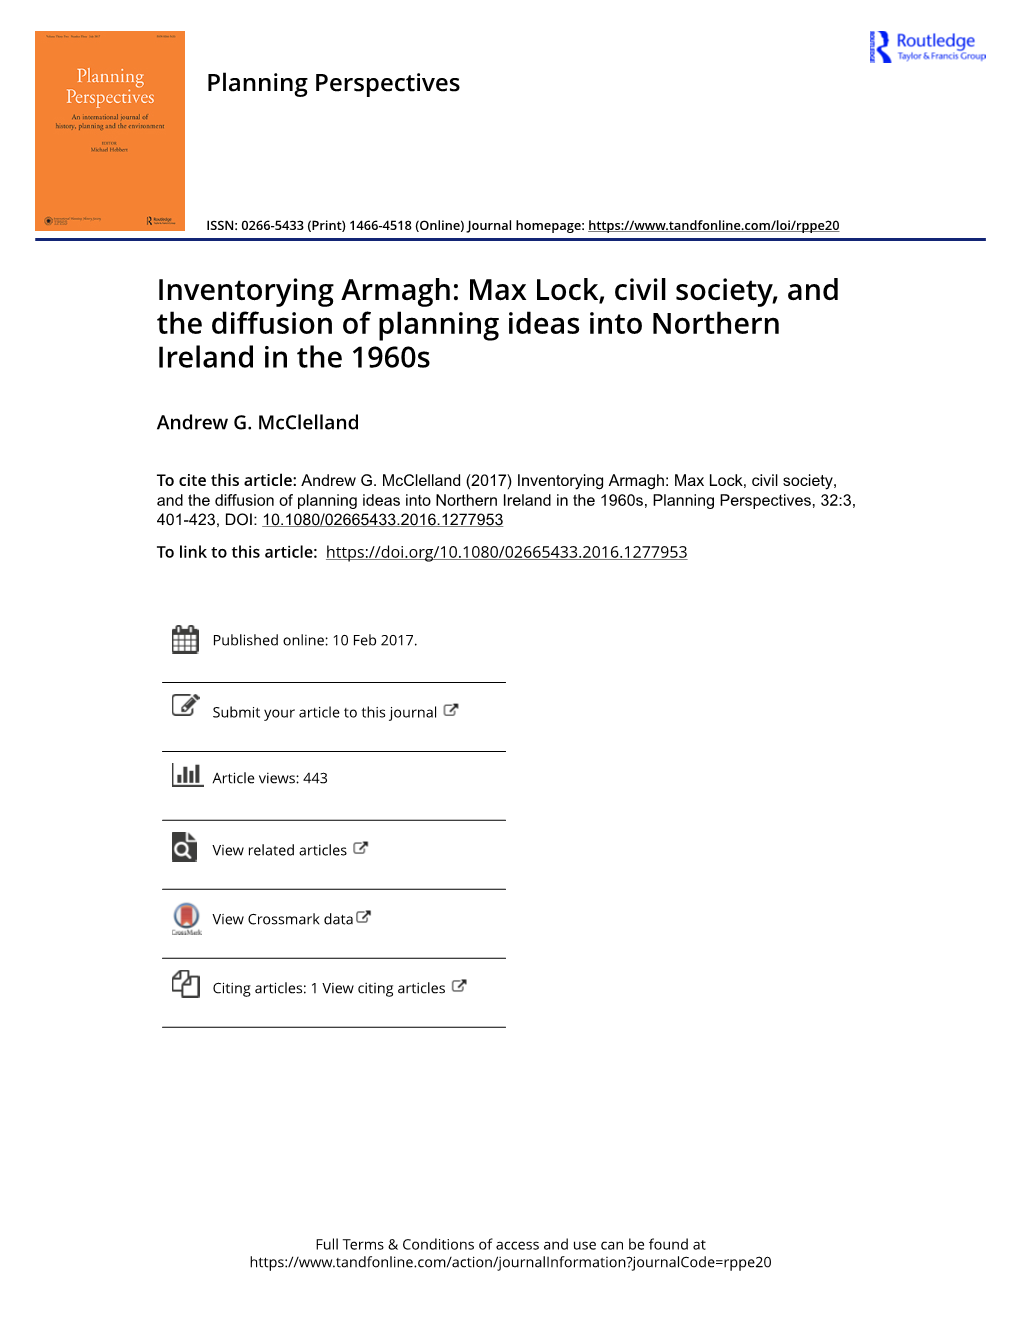 Inventorying Armagh: Max Lock, Civil Society, and the Diffusion of Planning Ideas Into Northern Ireland in the 1960S